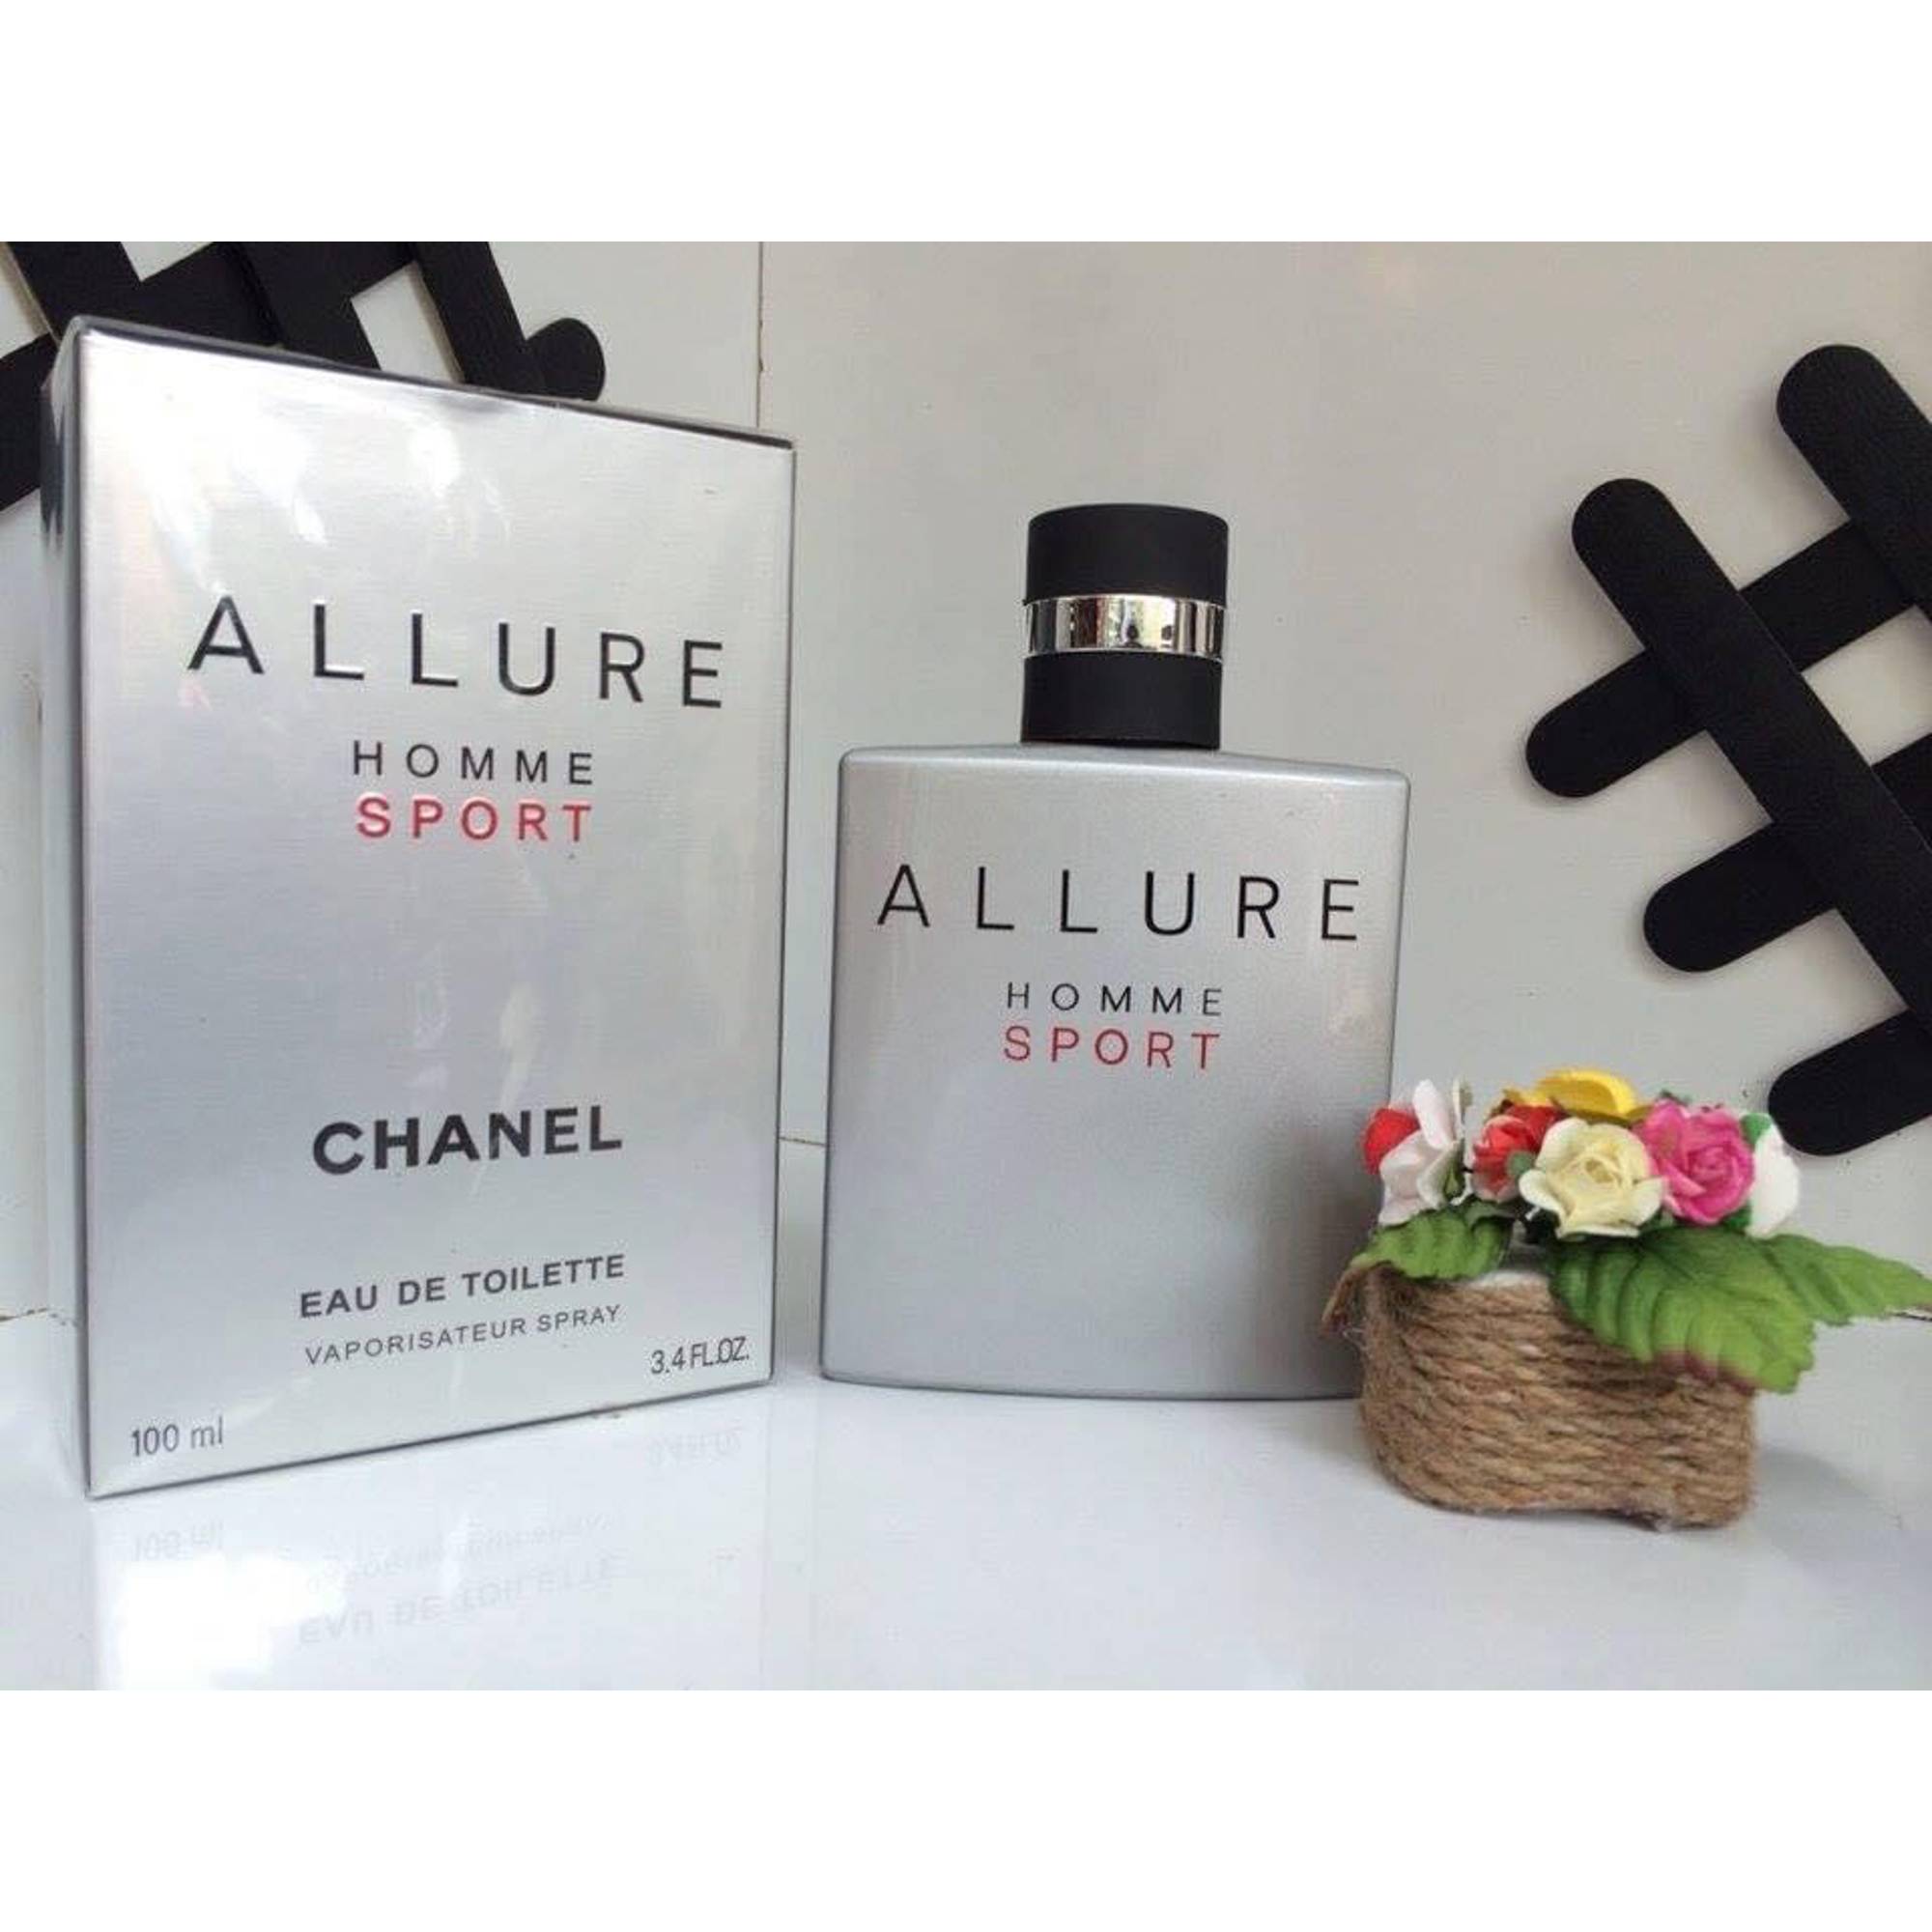 Chanel Allure homme sport edt